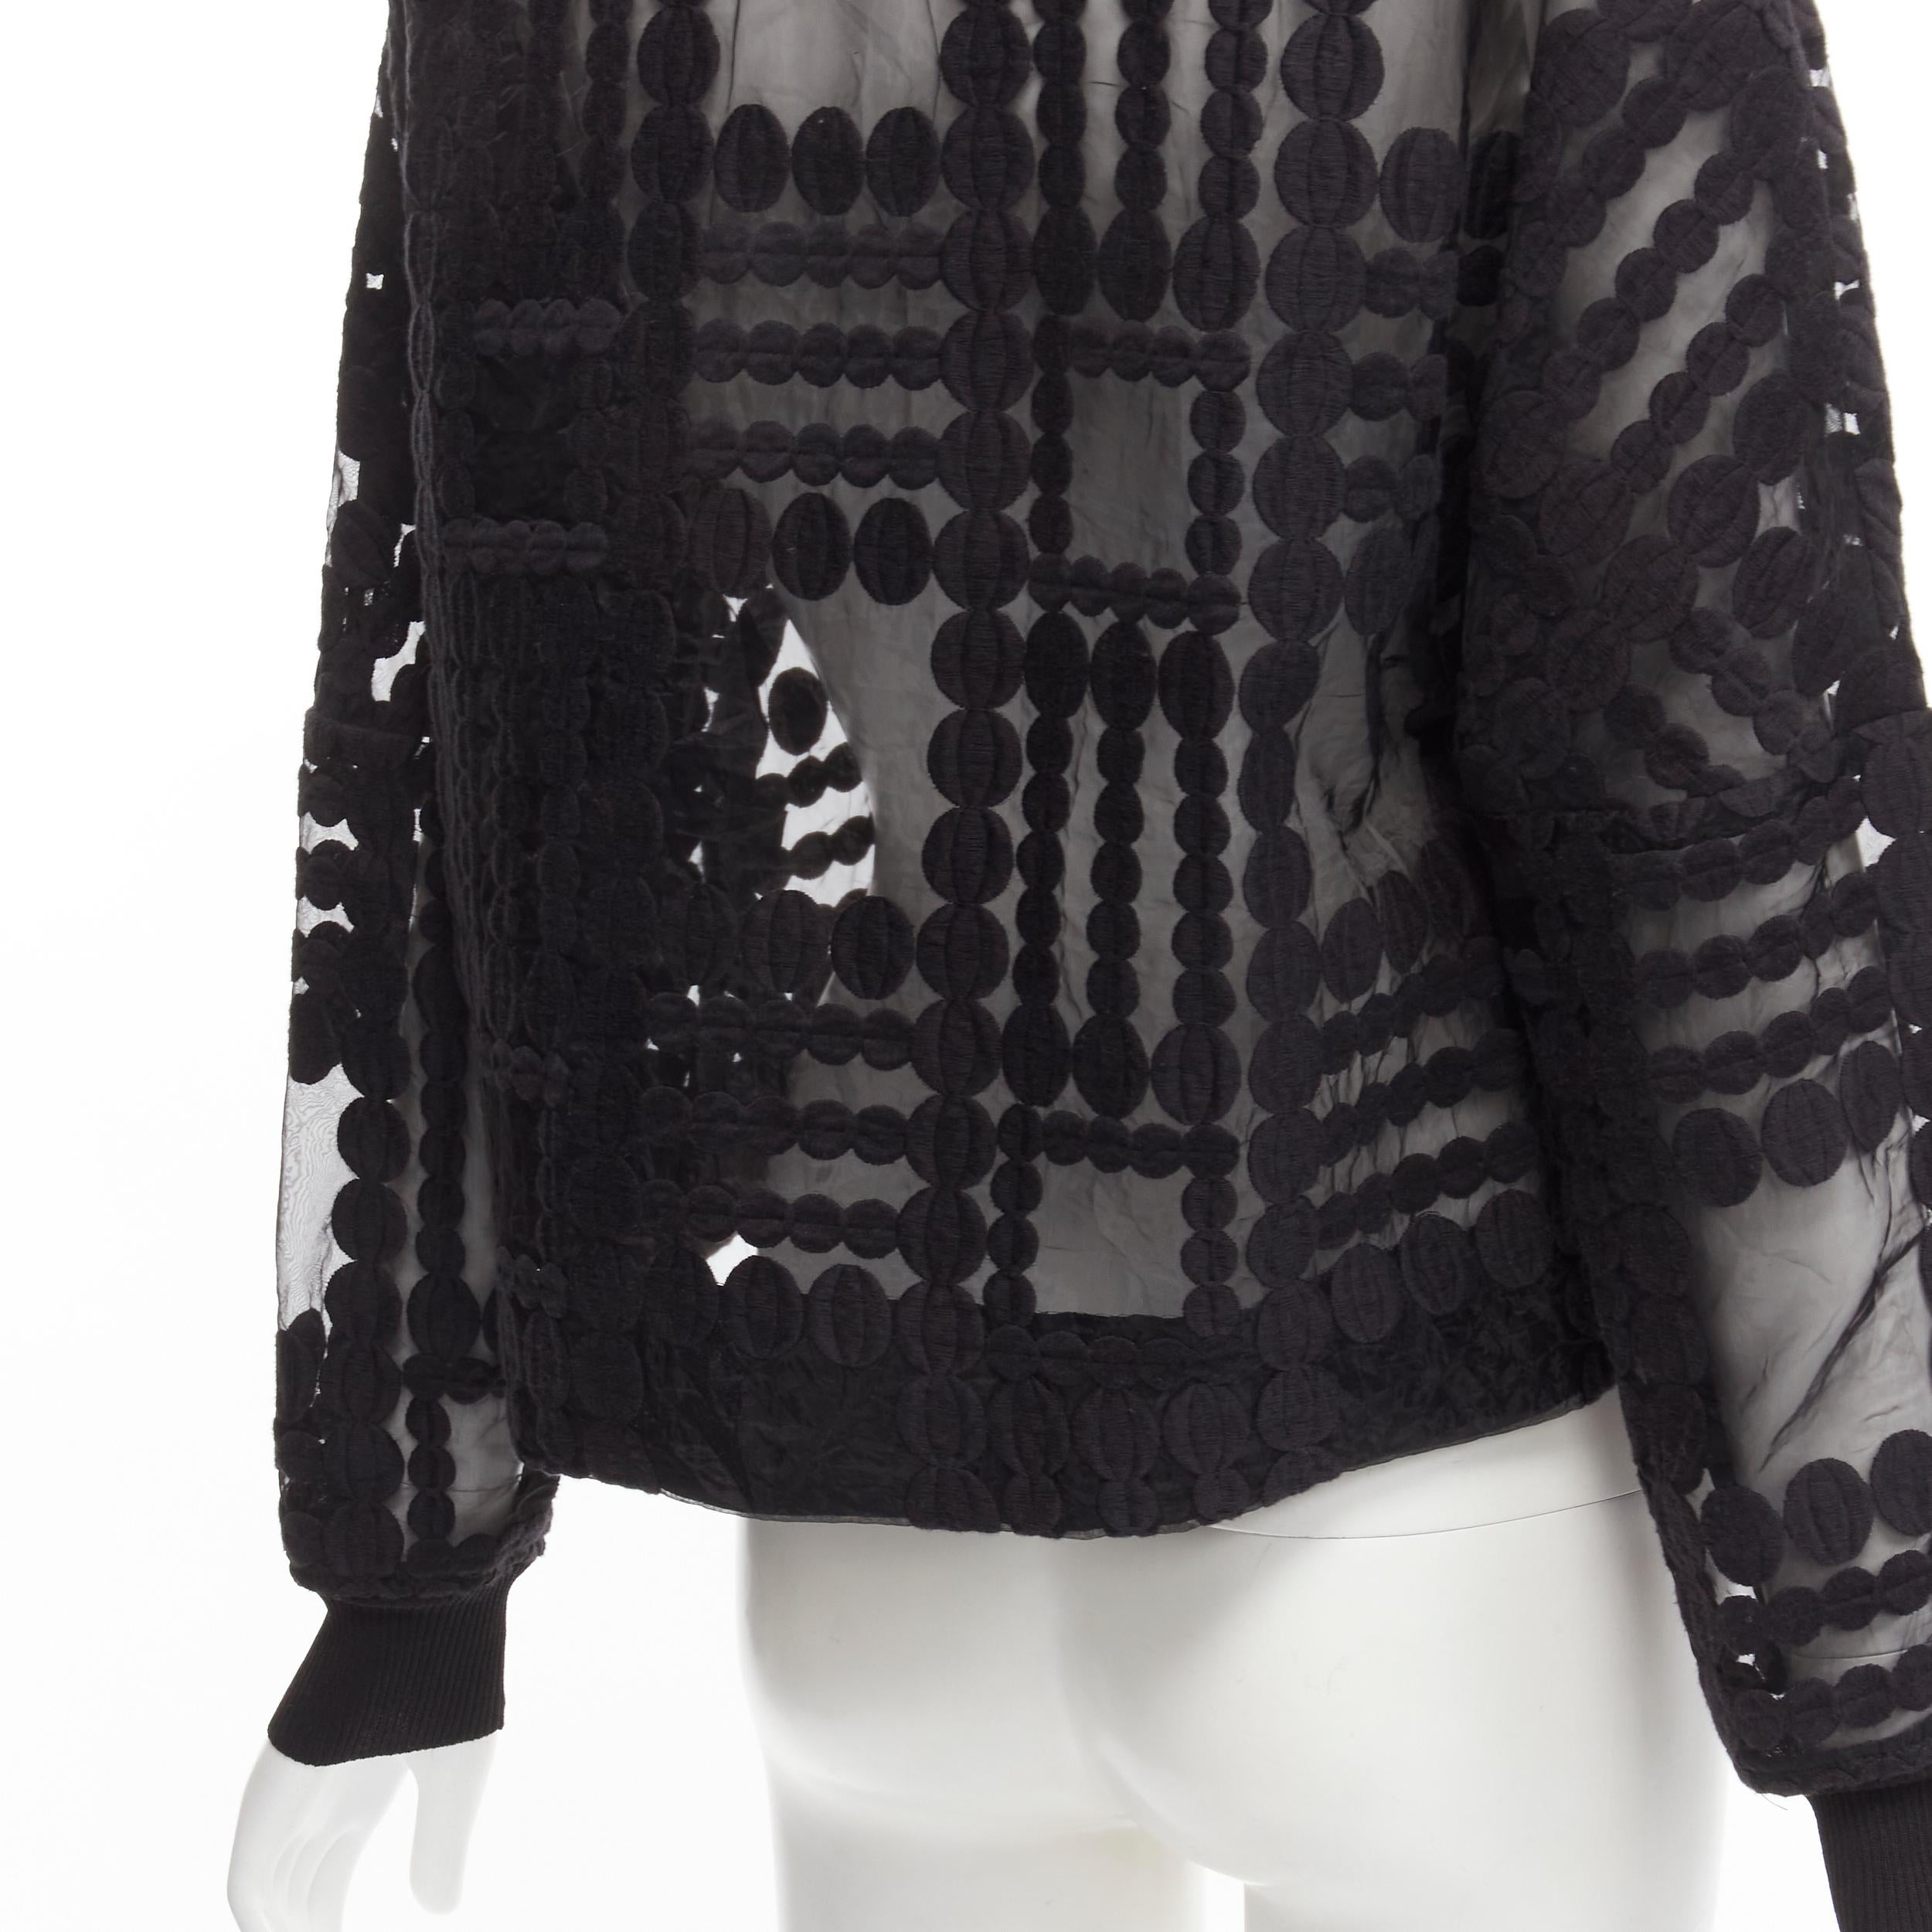 BY MALENE BIRGER black graphic circle embroidery sheer cropped sweater FR36 S
Reference: YNWG/A00146
Brand: Malene Birger
Material: Polyamide
Color: Black
Pattern: Solid
Closure: Pullover
Extra Details: Black rib cuffs.
Made in: